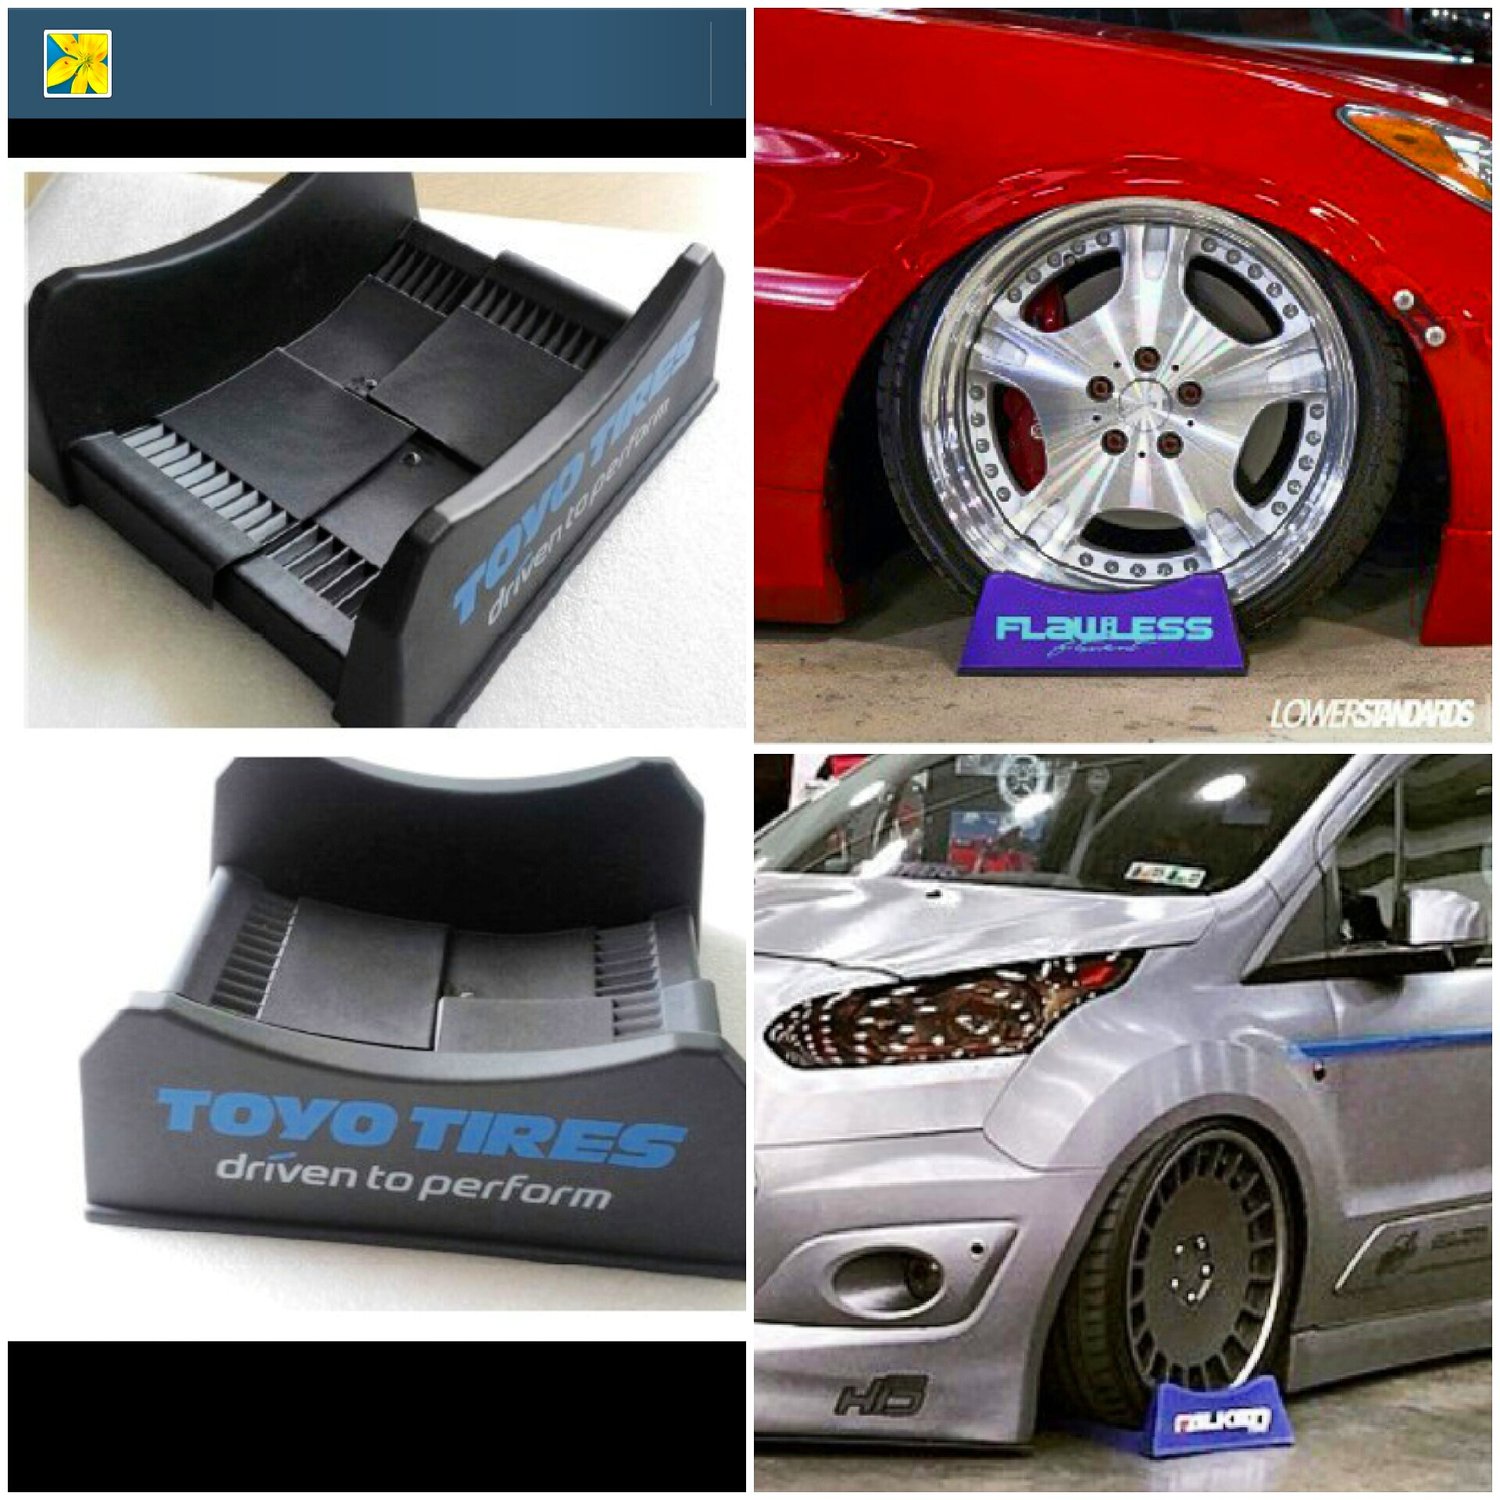 Image of Tire stands "Wheel Swag" (carshow wheel and tire displays)